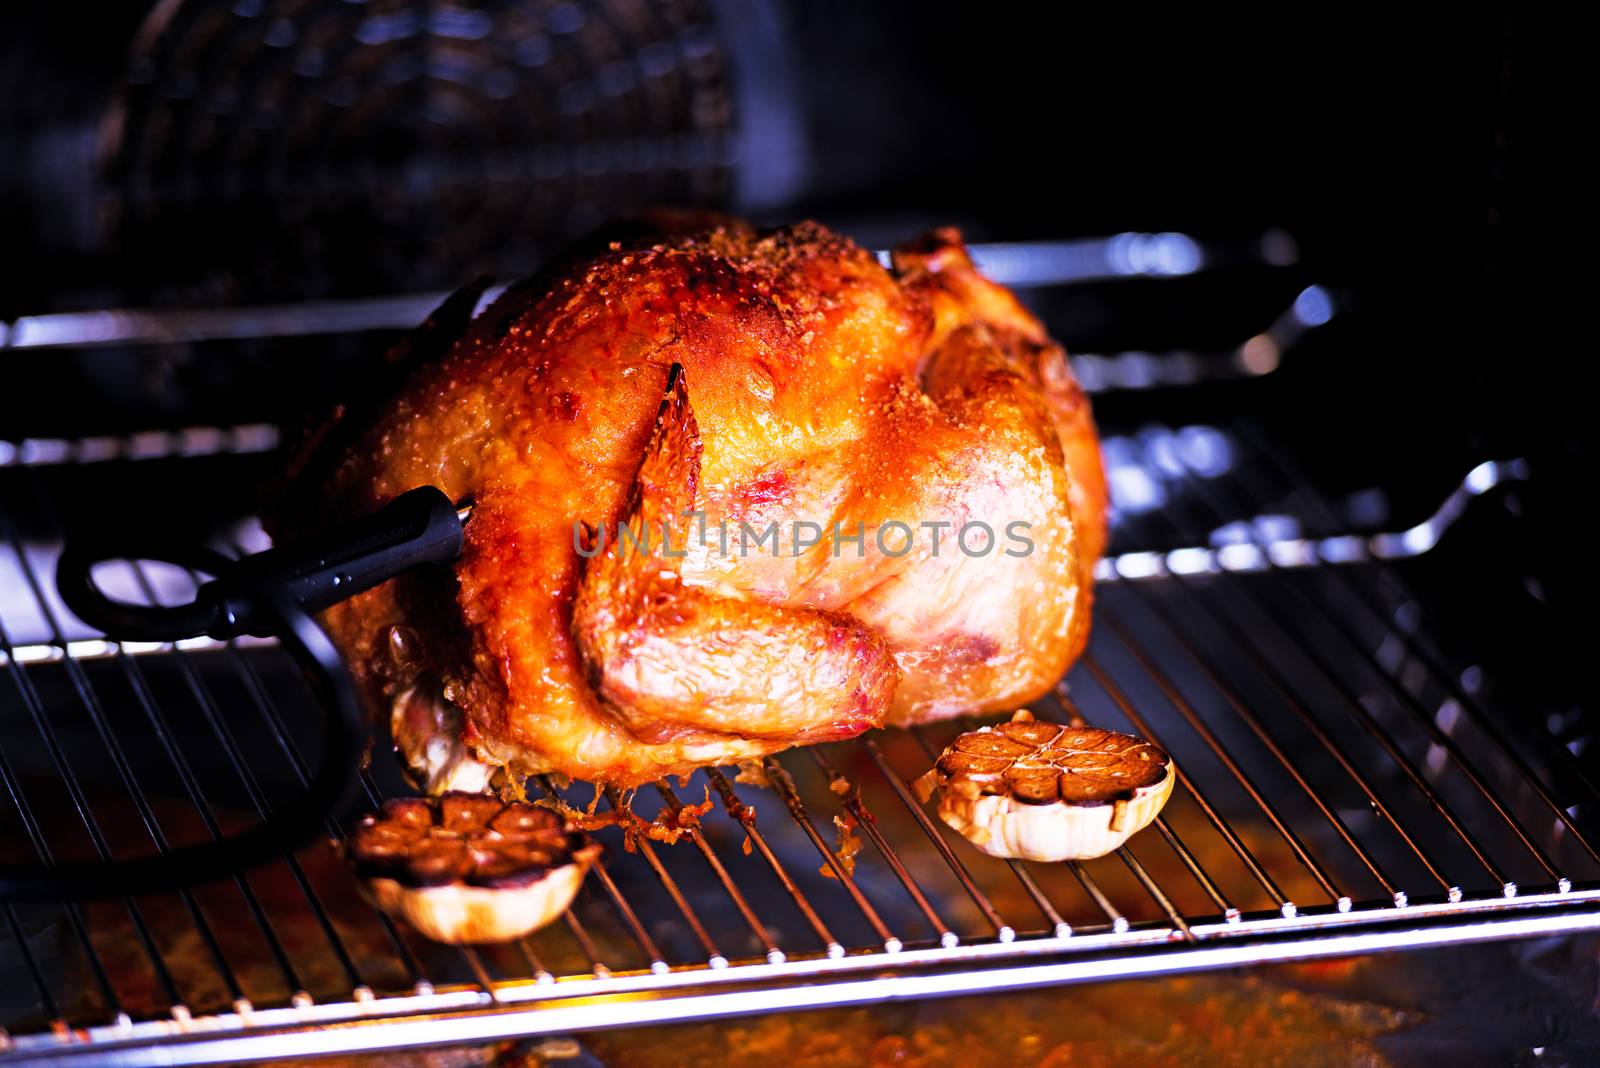 Whole chicken roasted in oven